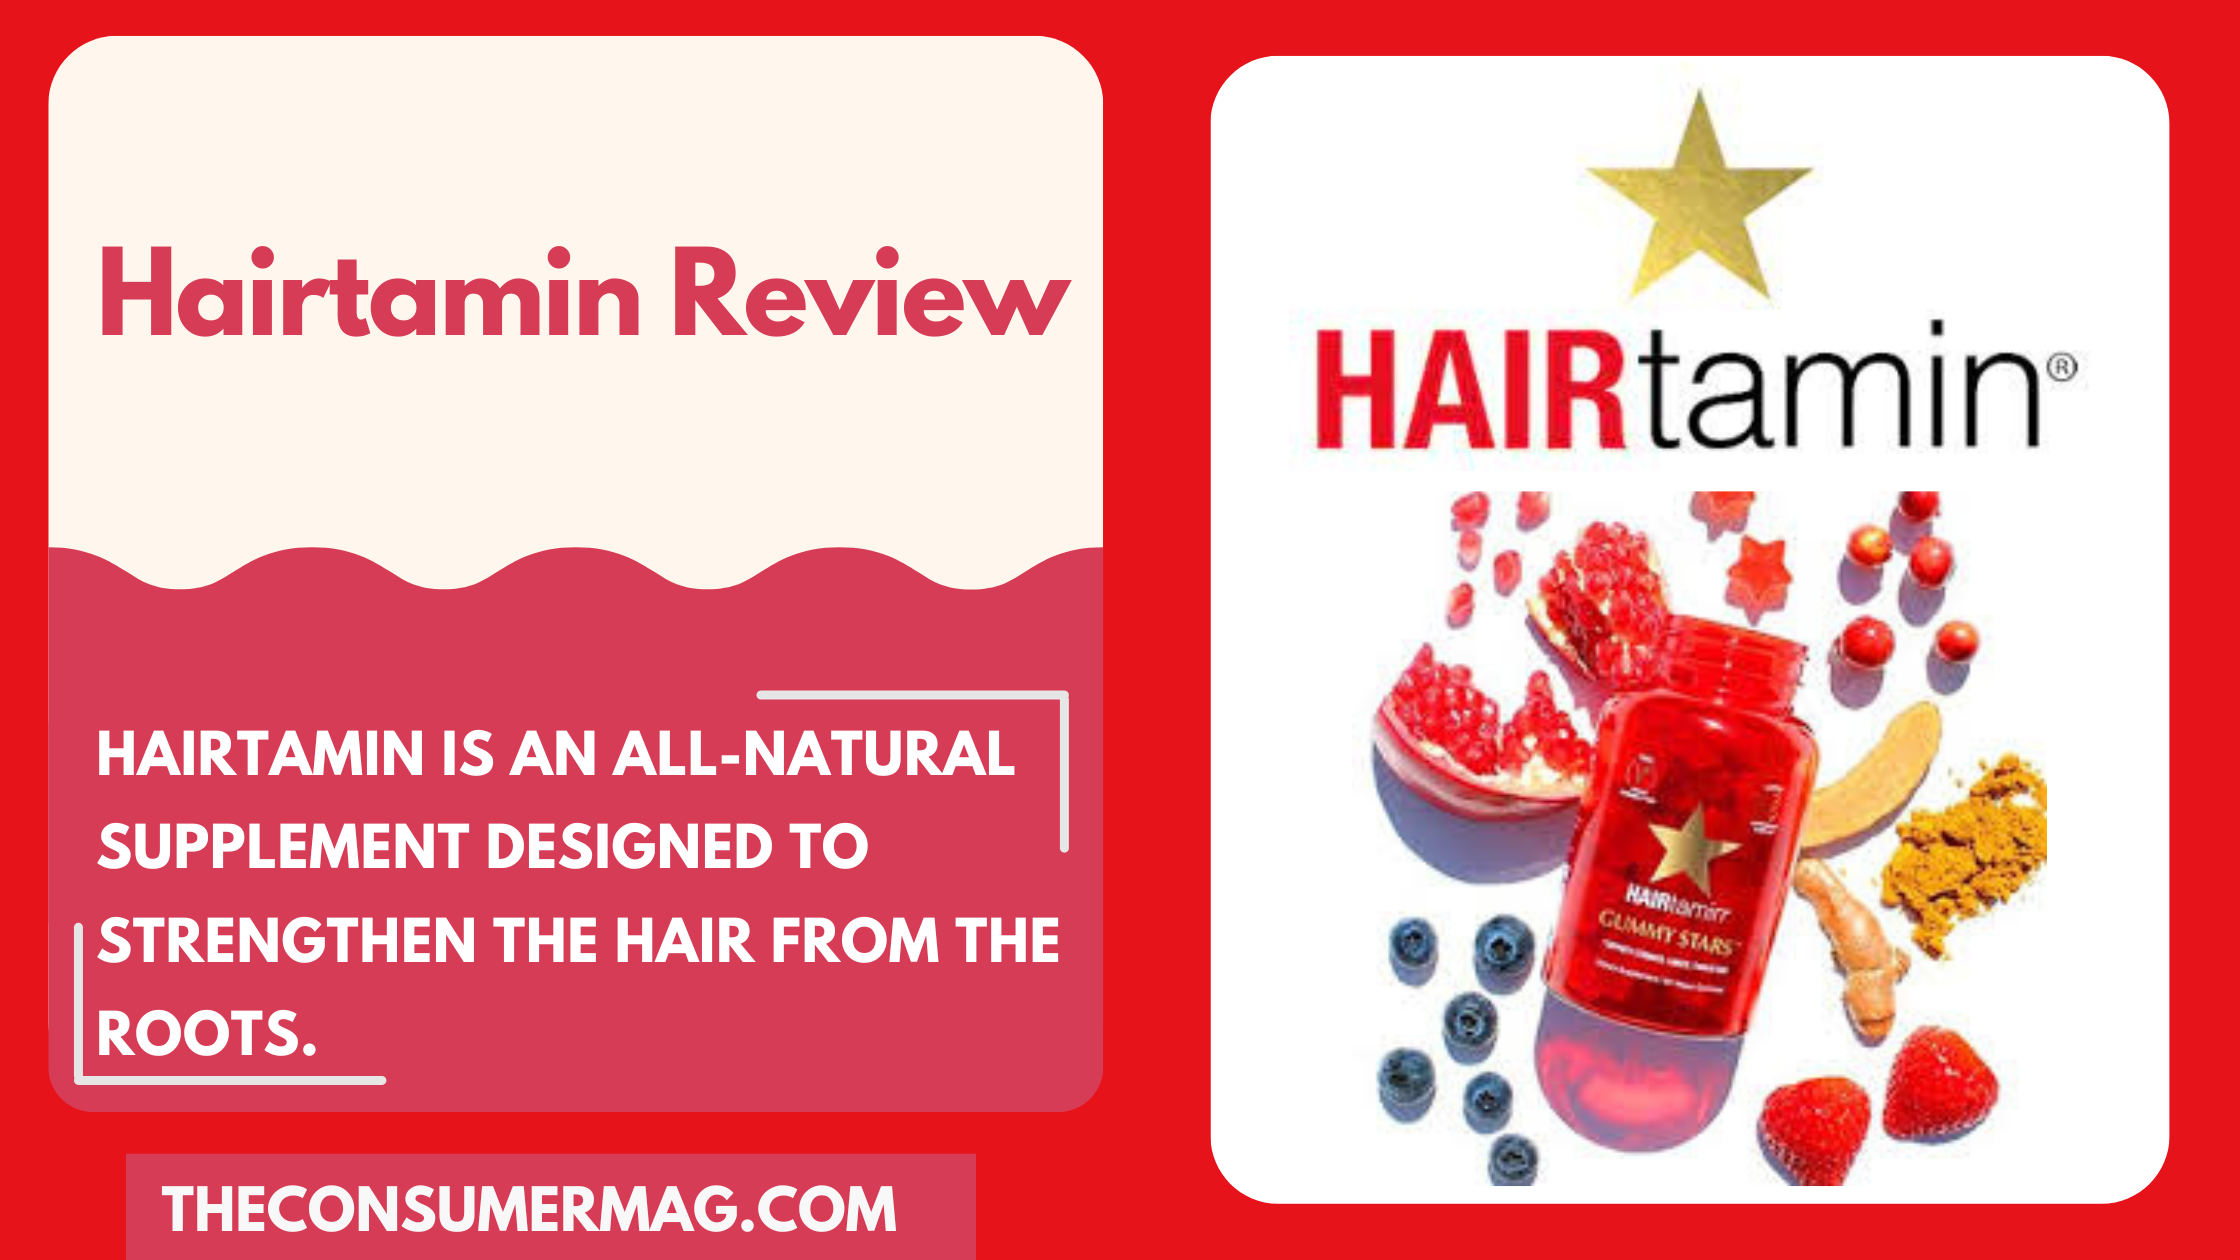 Hairtamin featured image